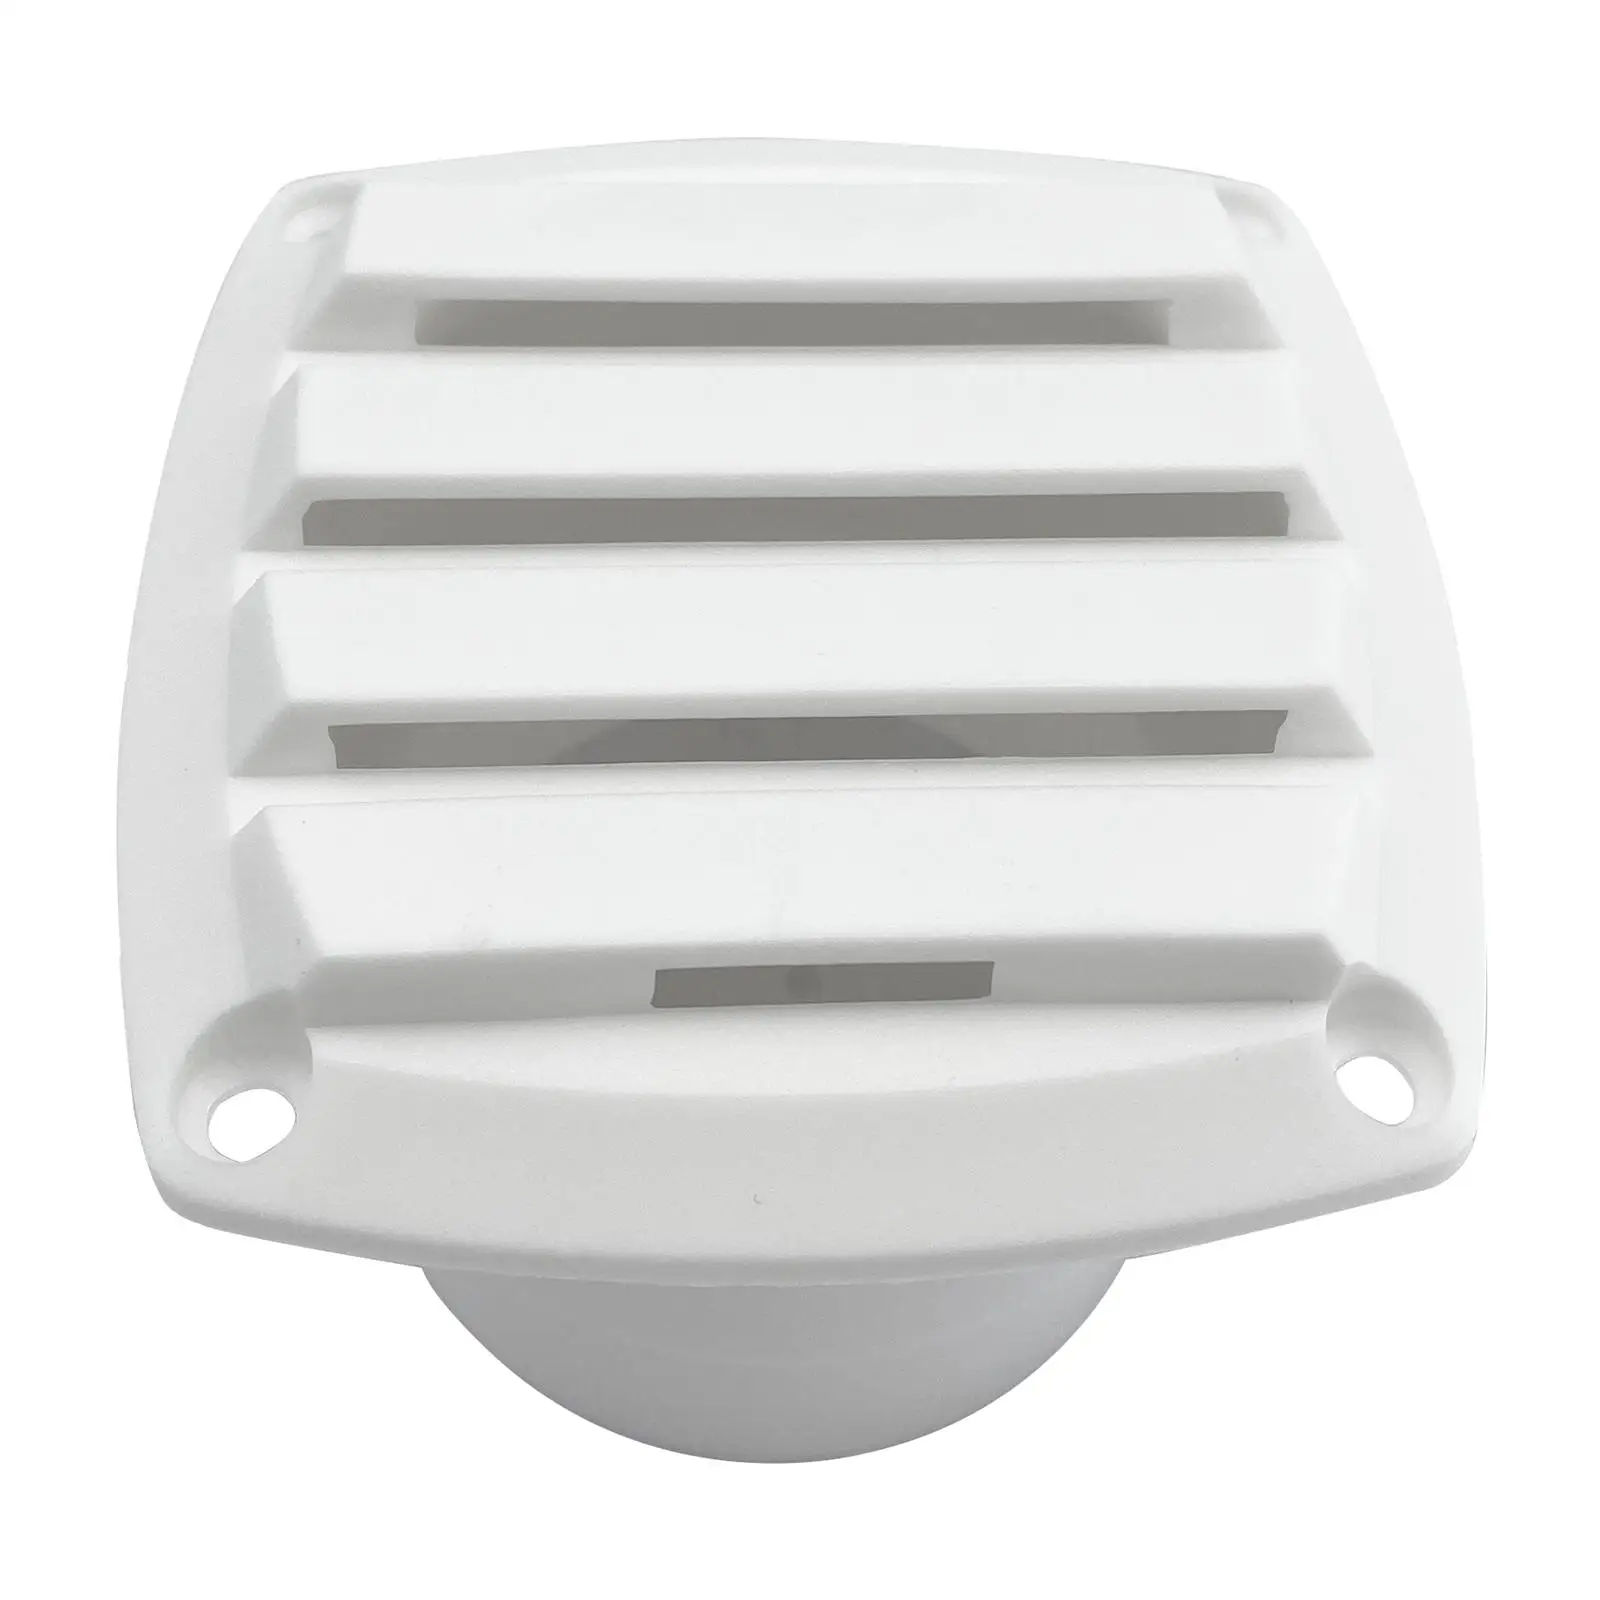  ,  Rectangle Ventilation Louver Grille Cover, for RV Boat   Vents White